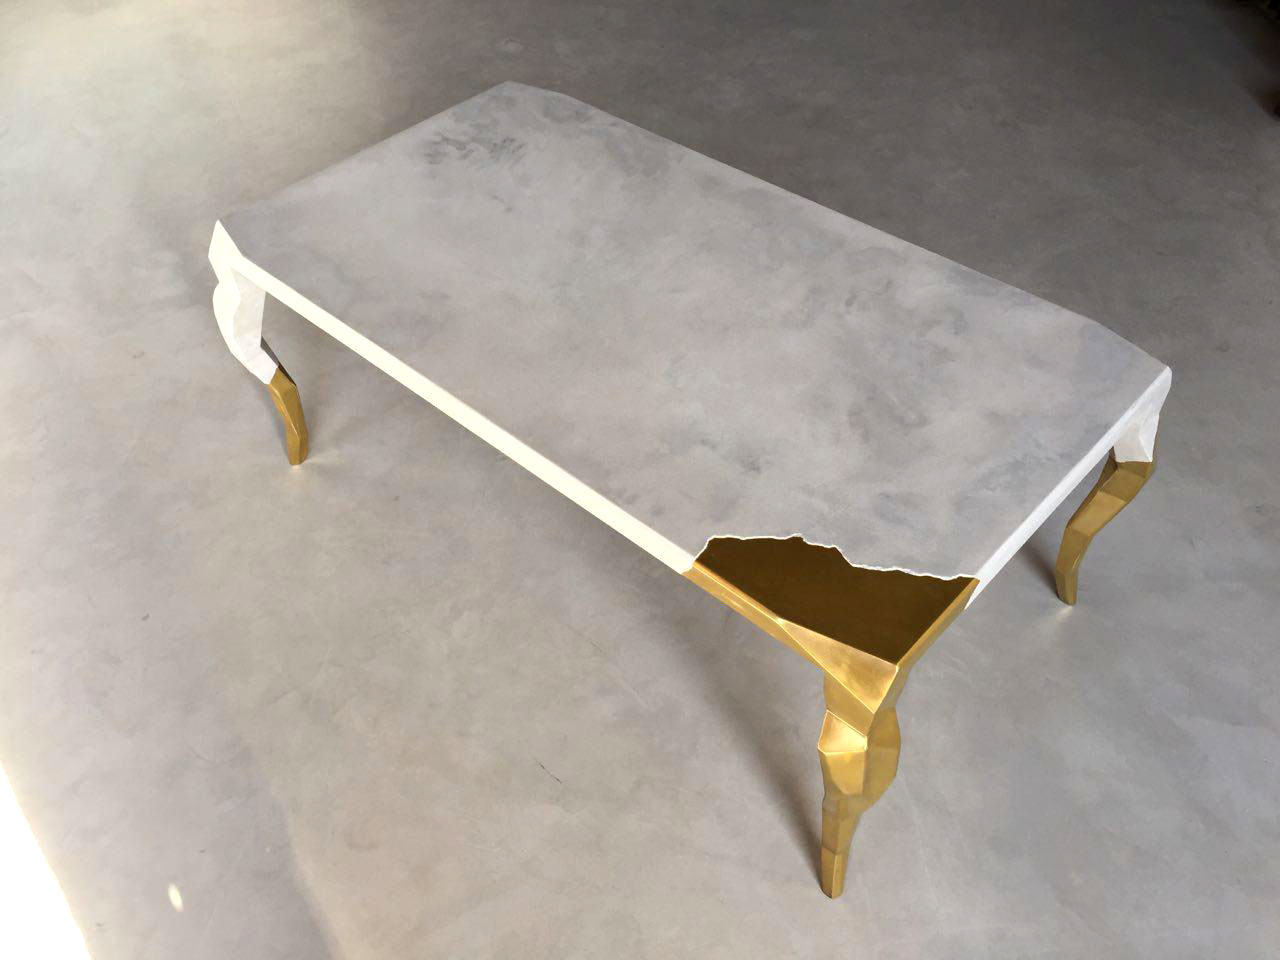 Table as a microcement furniture